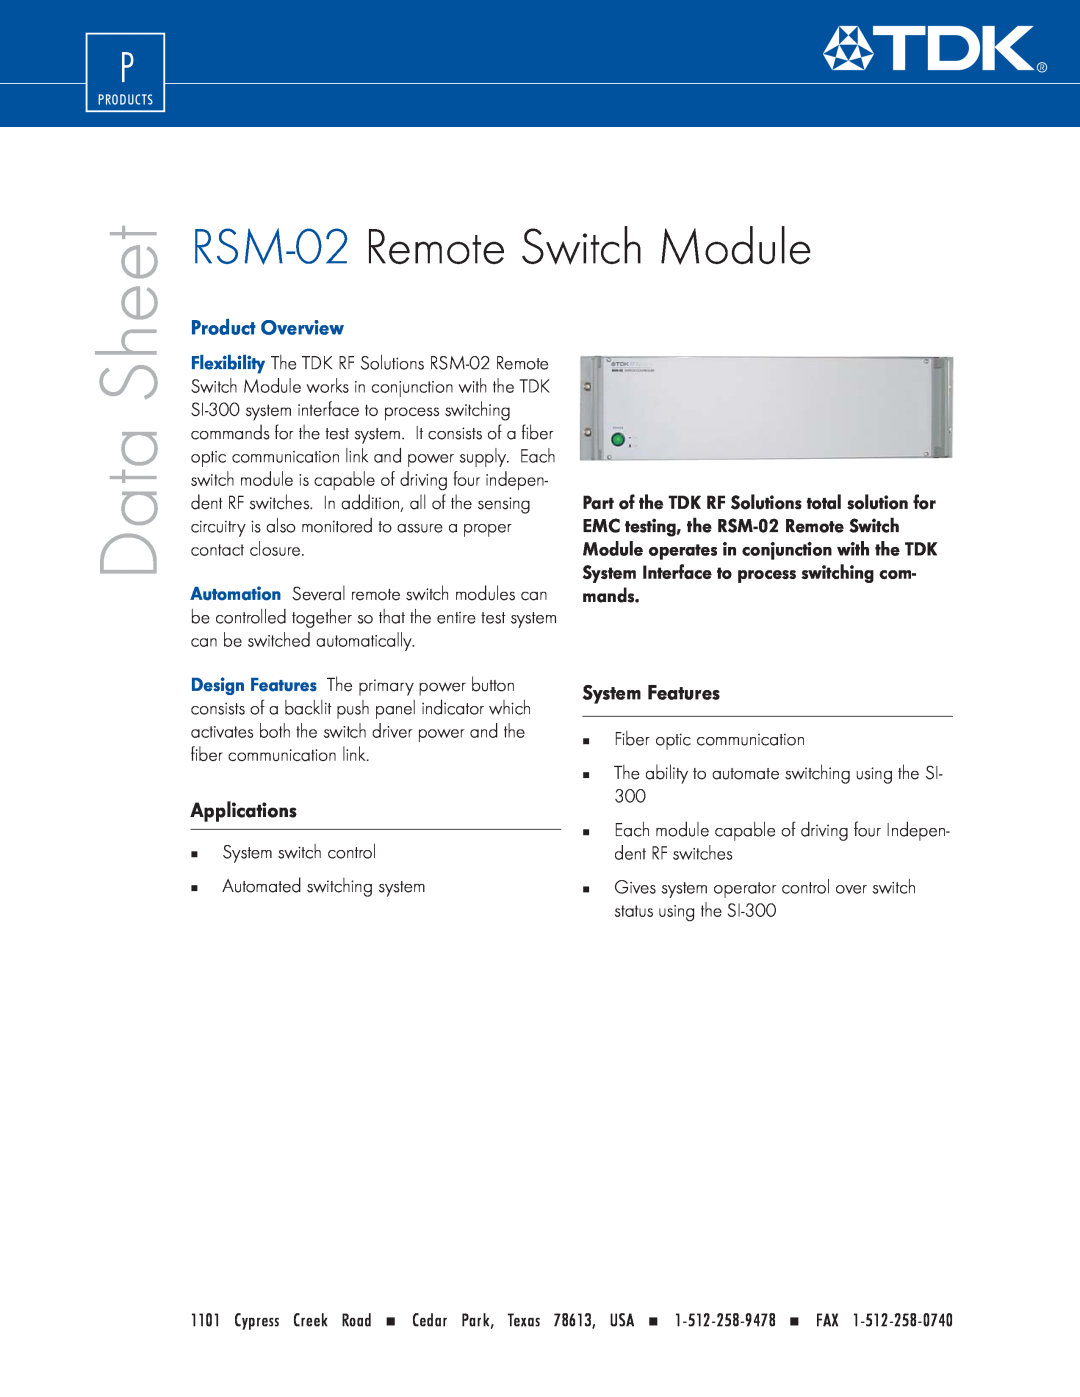 TDK manual RSM-02 Remote Switch Module, Applications, System Features, „ Fiber optic communication, Data, Sheet 